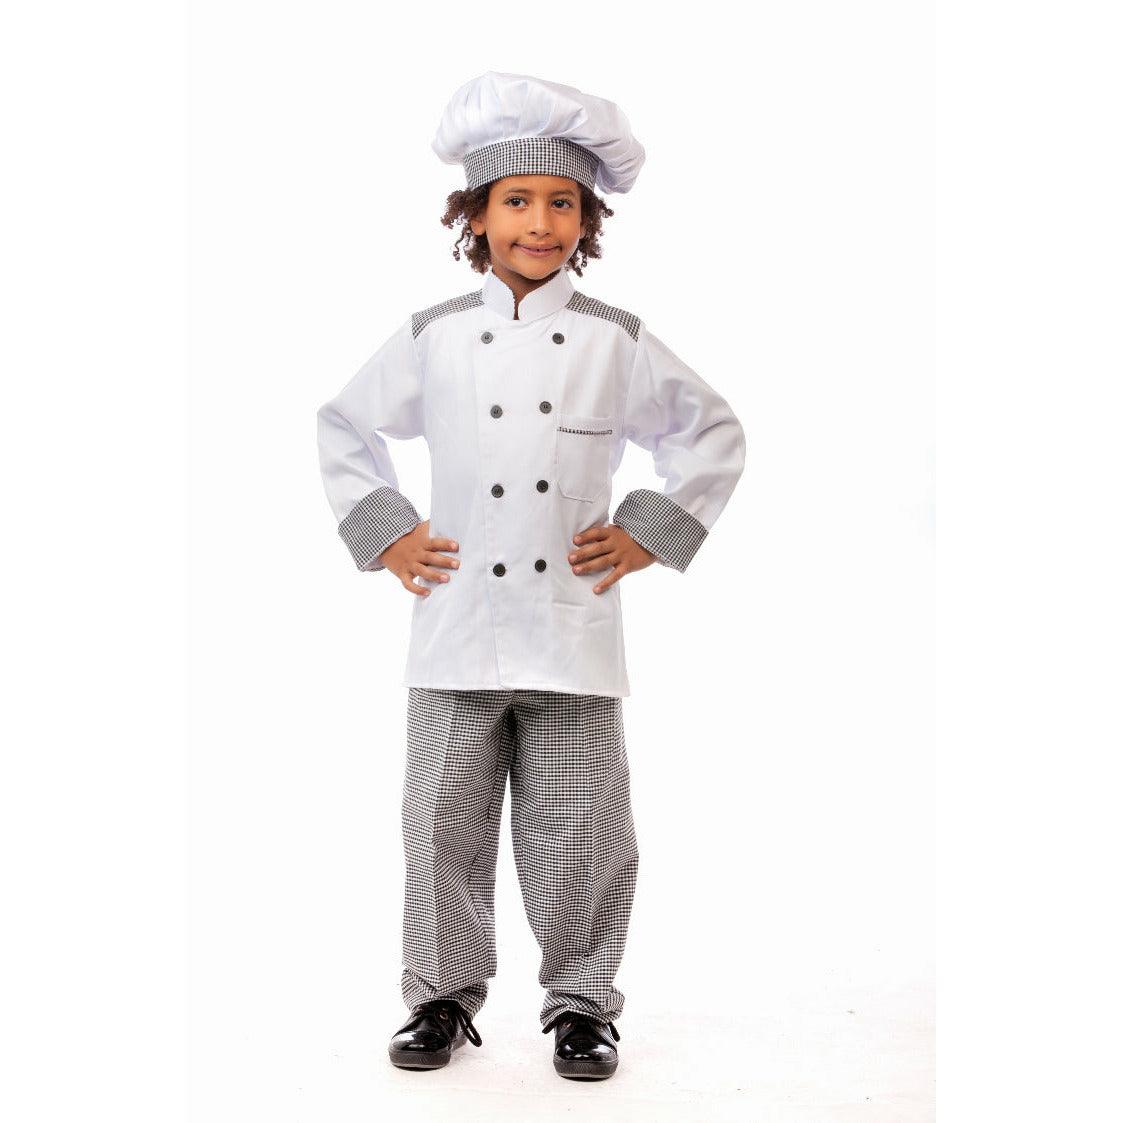 Cook Costume - Ourkids - M&amp;A